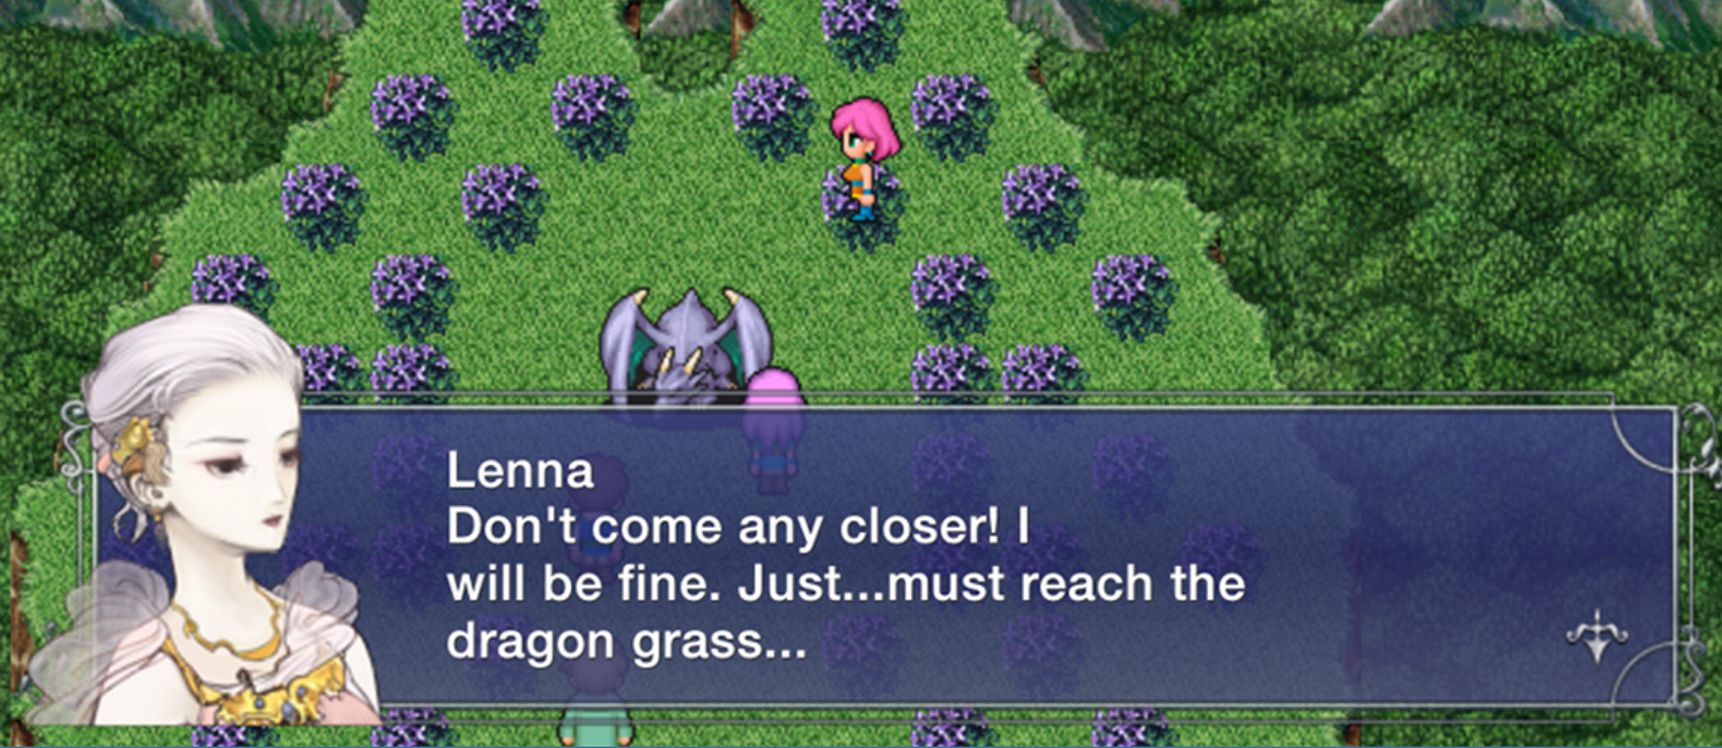 Image for Final Fantasy 5 is coming to PC later this month